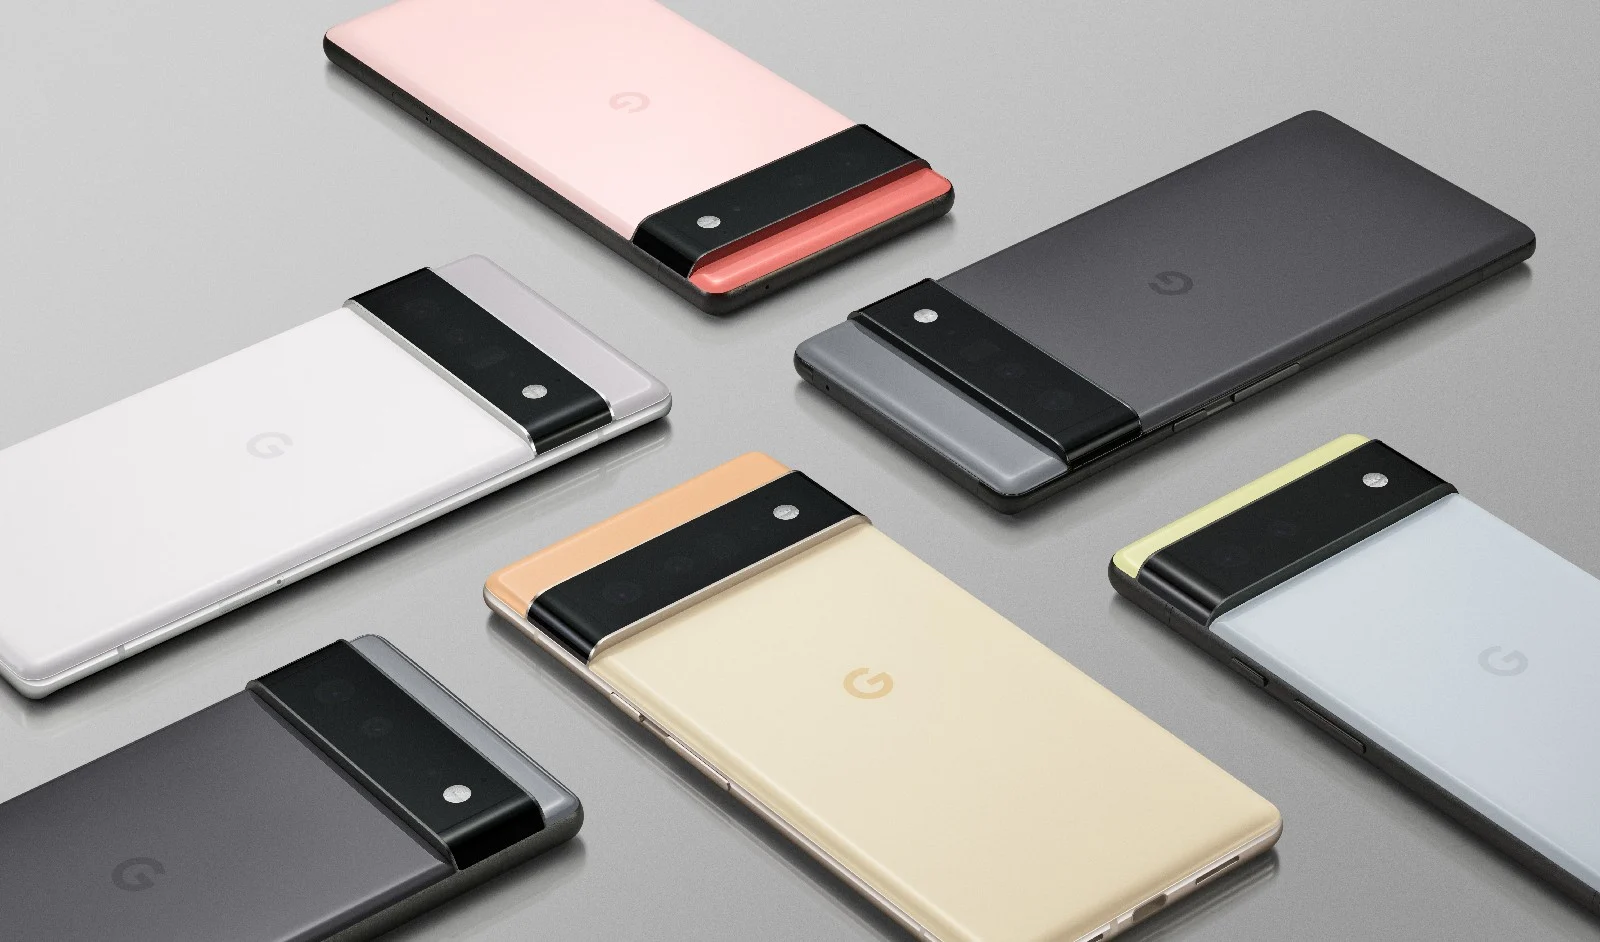 Six Google Pixel 6 and Pixel 6 Pro devices laying on a grey surface at various angles, perpendicular to each other.